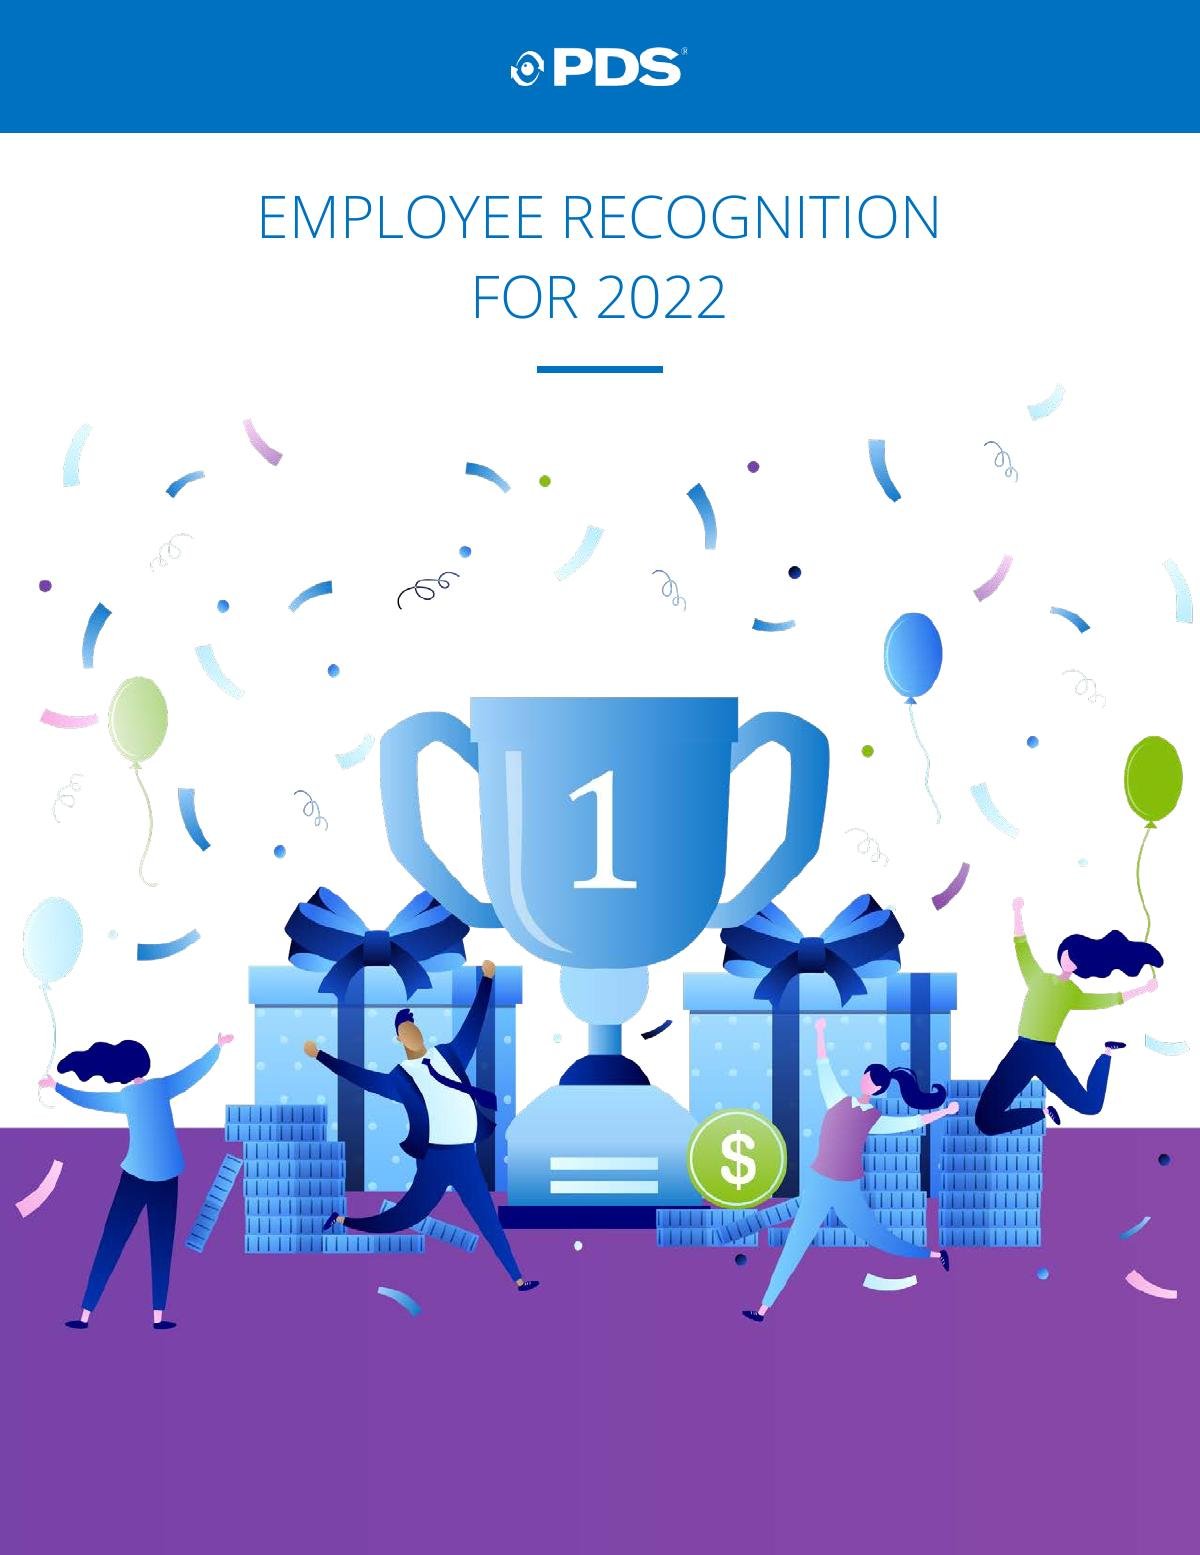 Employee Recognition for 2022